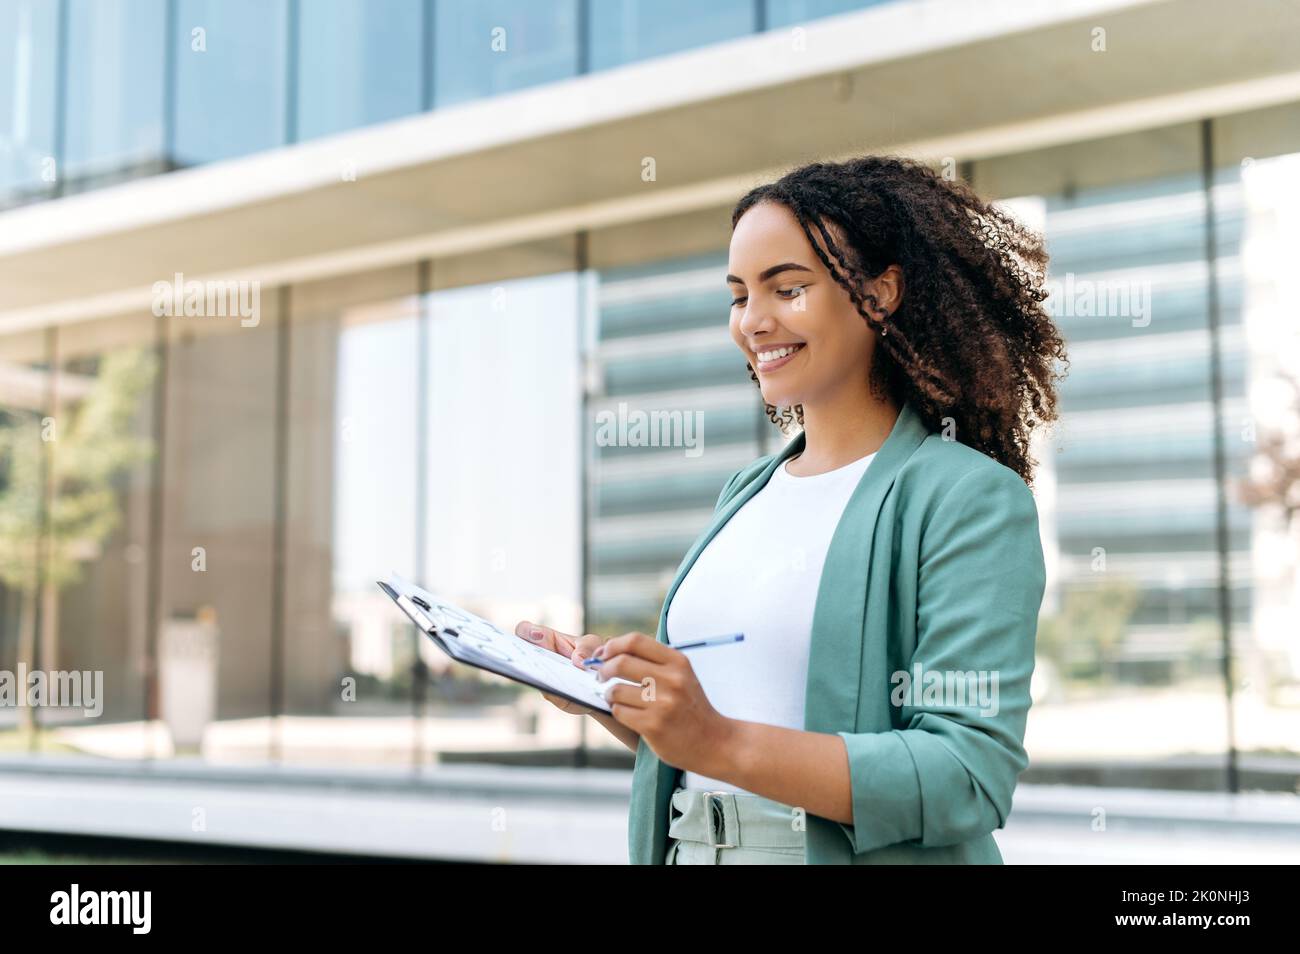 Beautiful confident successful latino or brazilian young woman with curly hair, business lady, financial expert, in elegant wear, standing outdoors with financial charts, analyze graphs, smiling Stock Photo